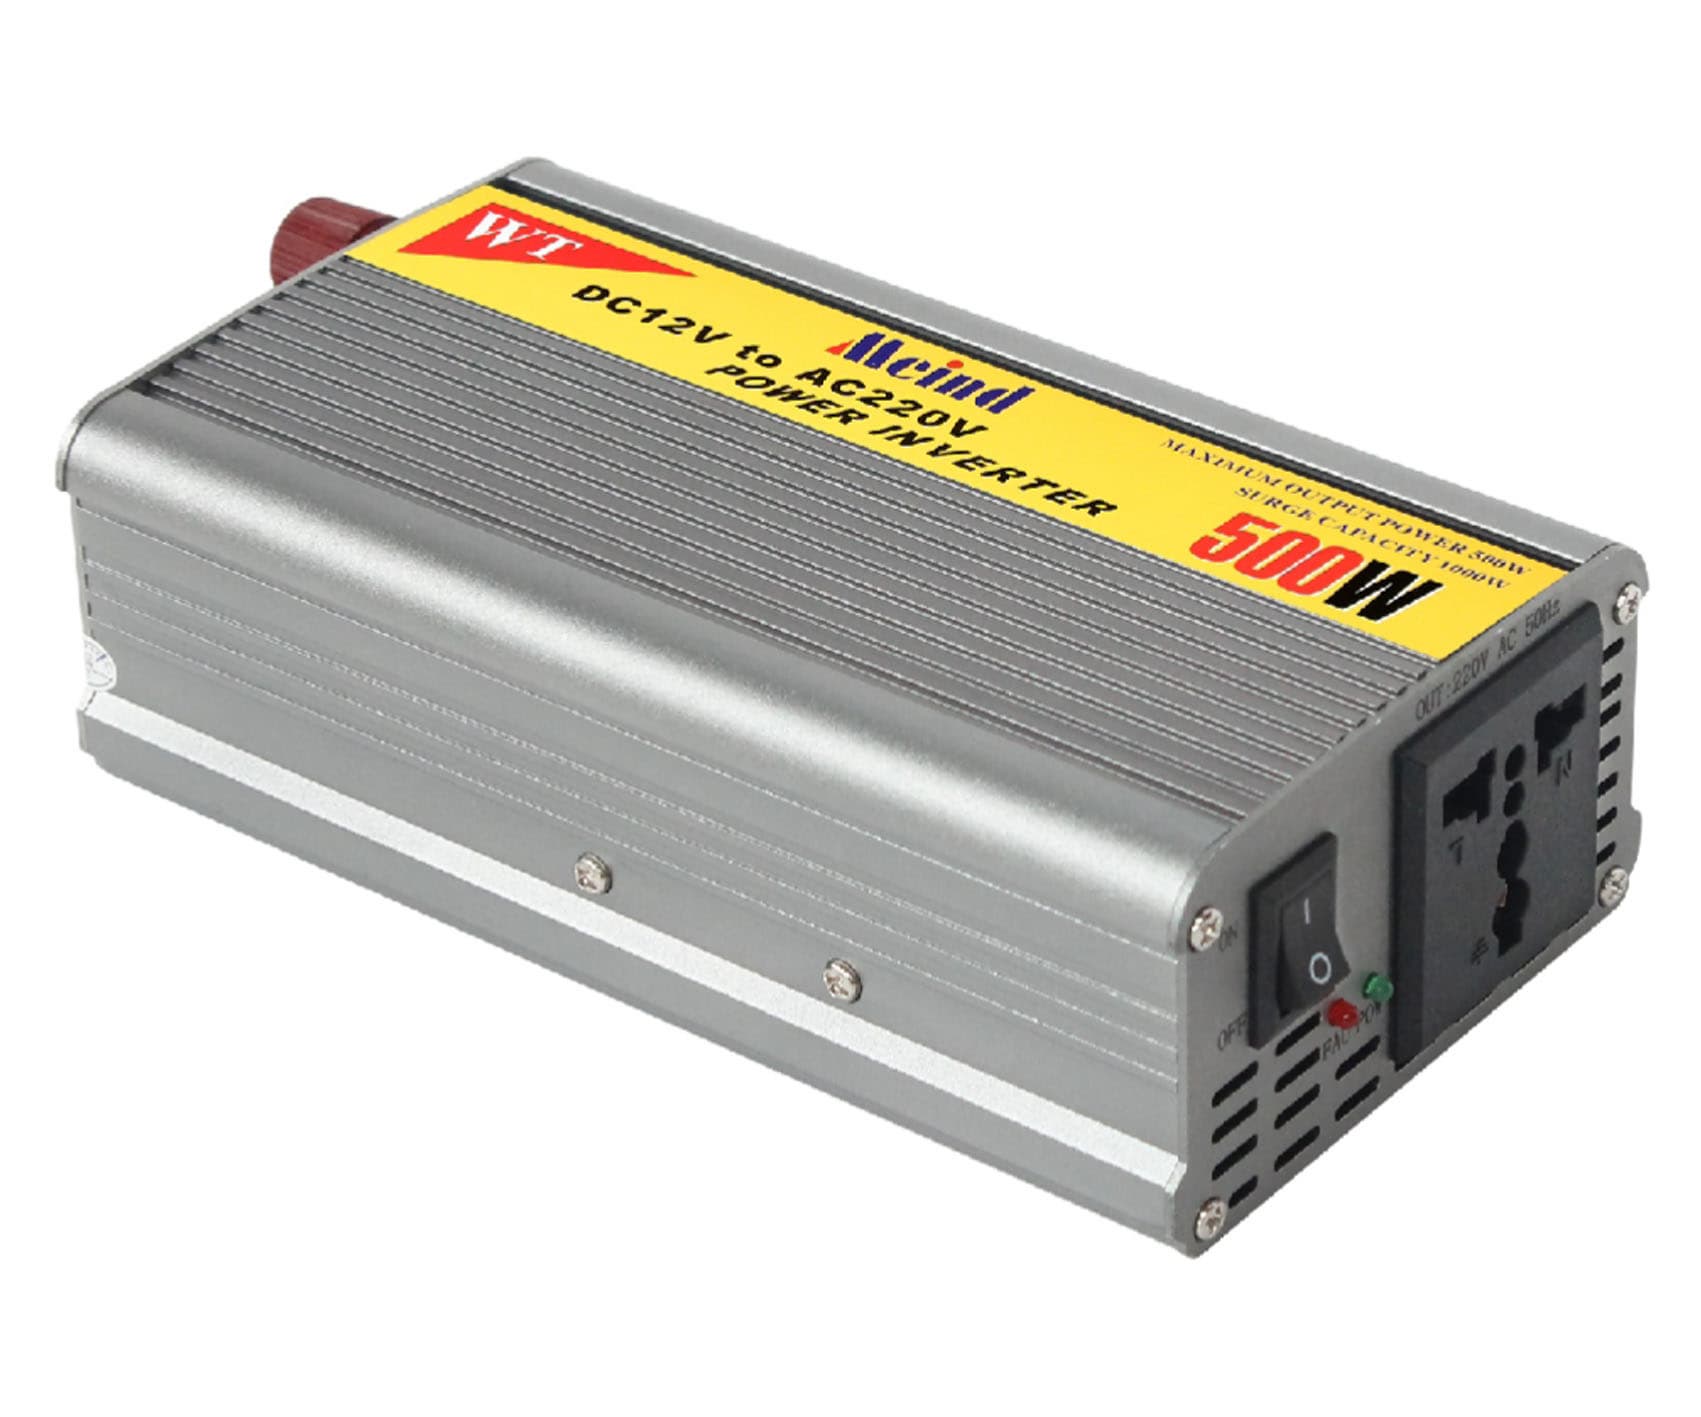 DC AC   power inverter 500W with charger